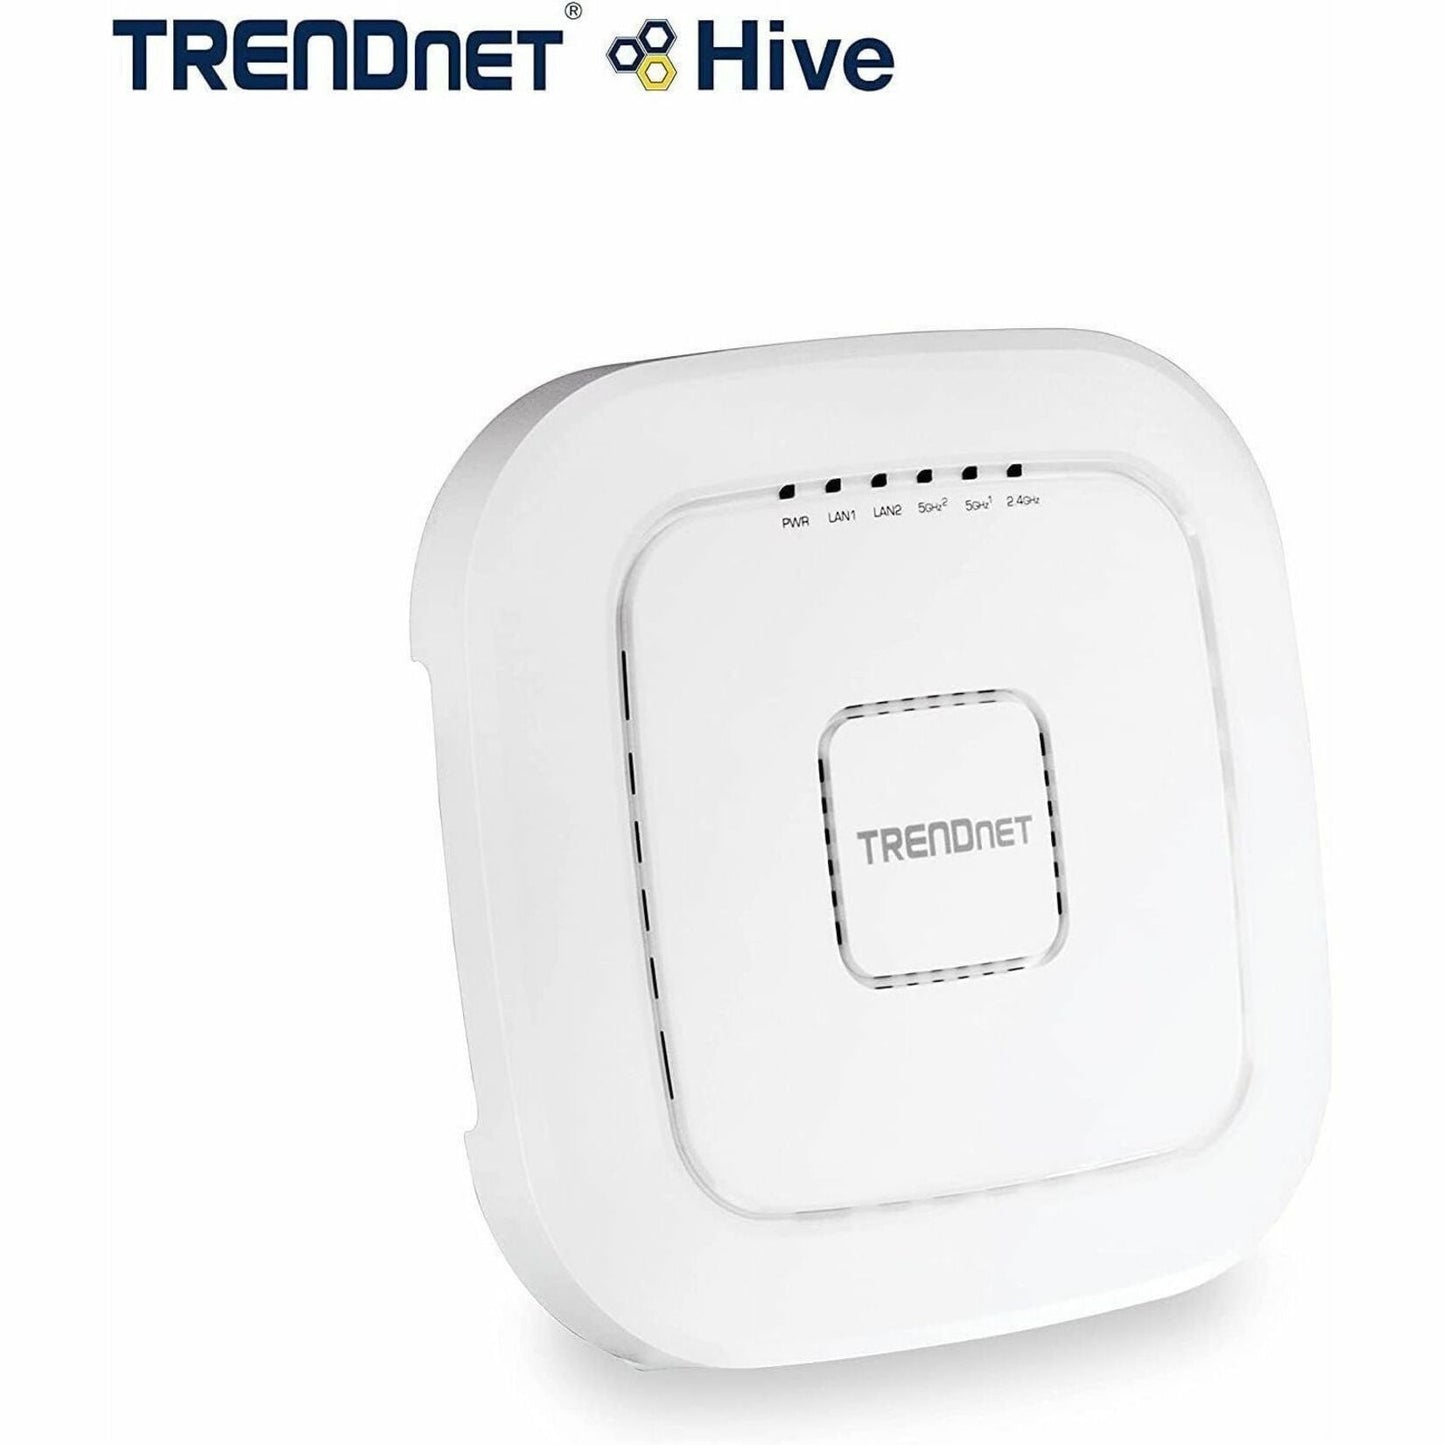 TRENDnet AC2200 Tri-Band PoE+ Indoor Wireless Access Point 867Mbps WiFi AC + 400Mbps WiFi N Bands Wave 2 MUMIMO Client bridge WDS AP WDS Bridge WDS Station Repeater Modes White TEW-826DAP